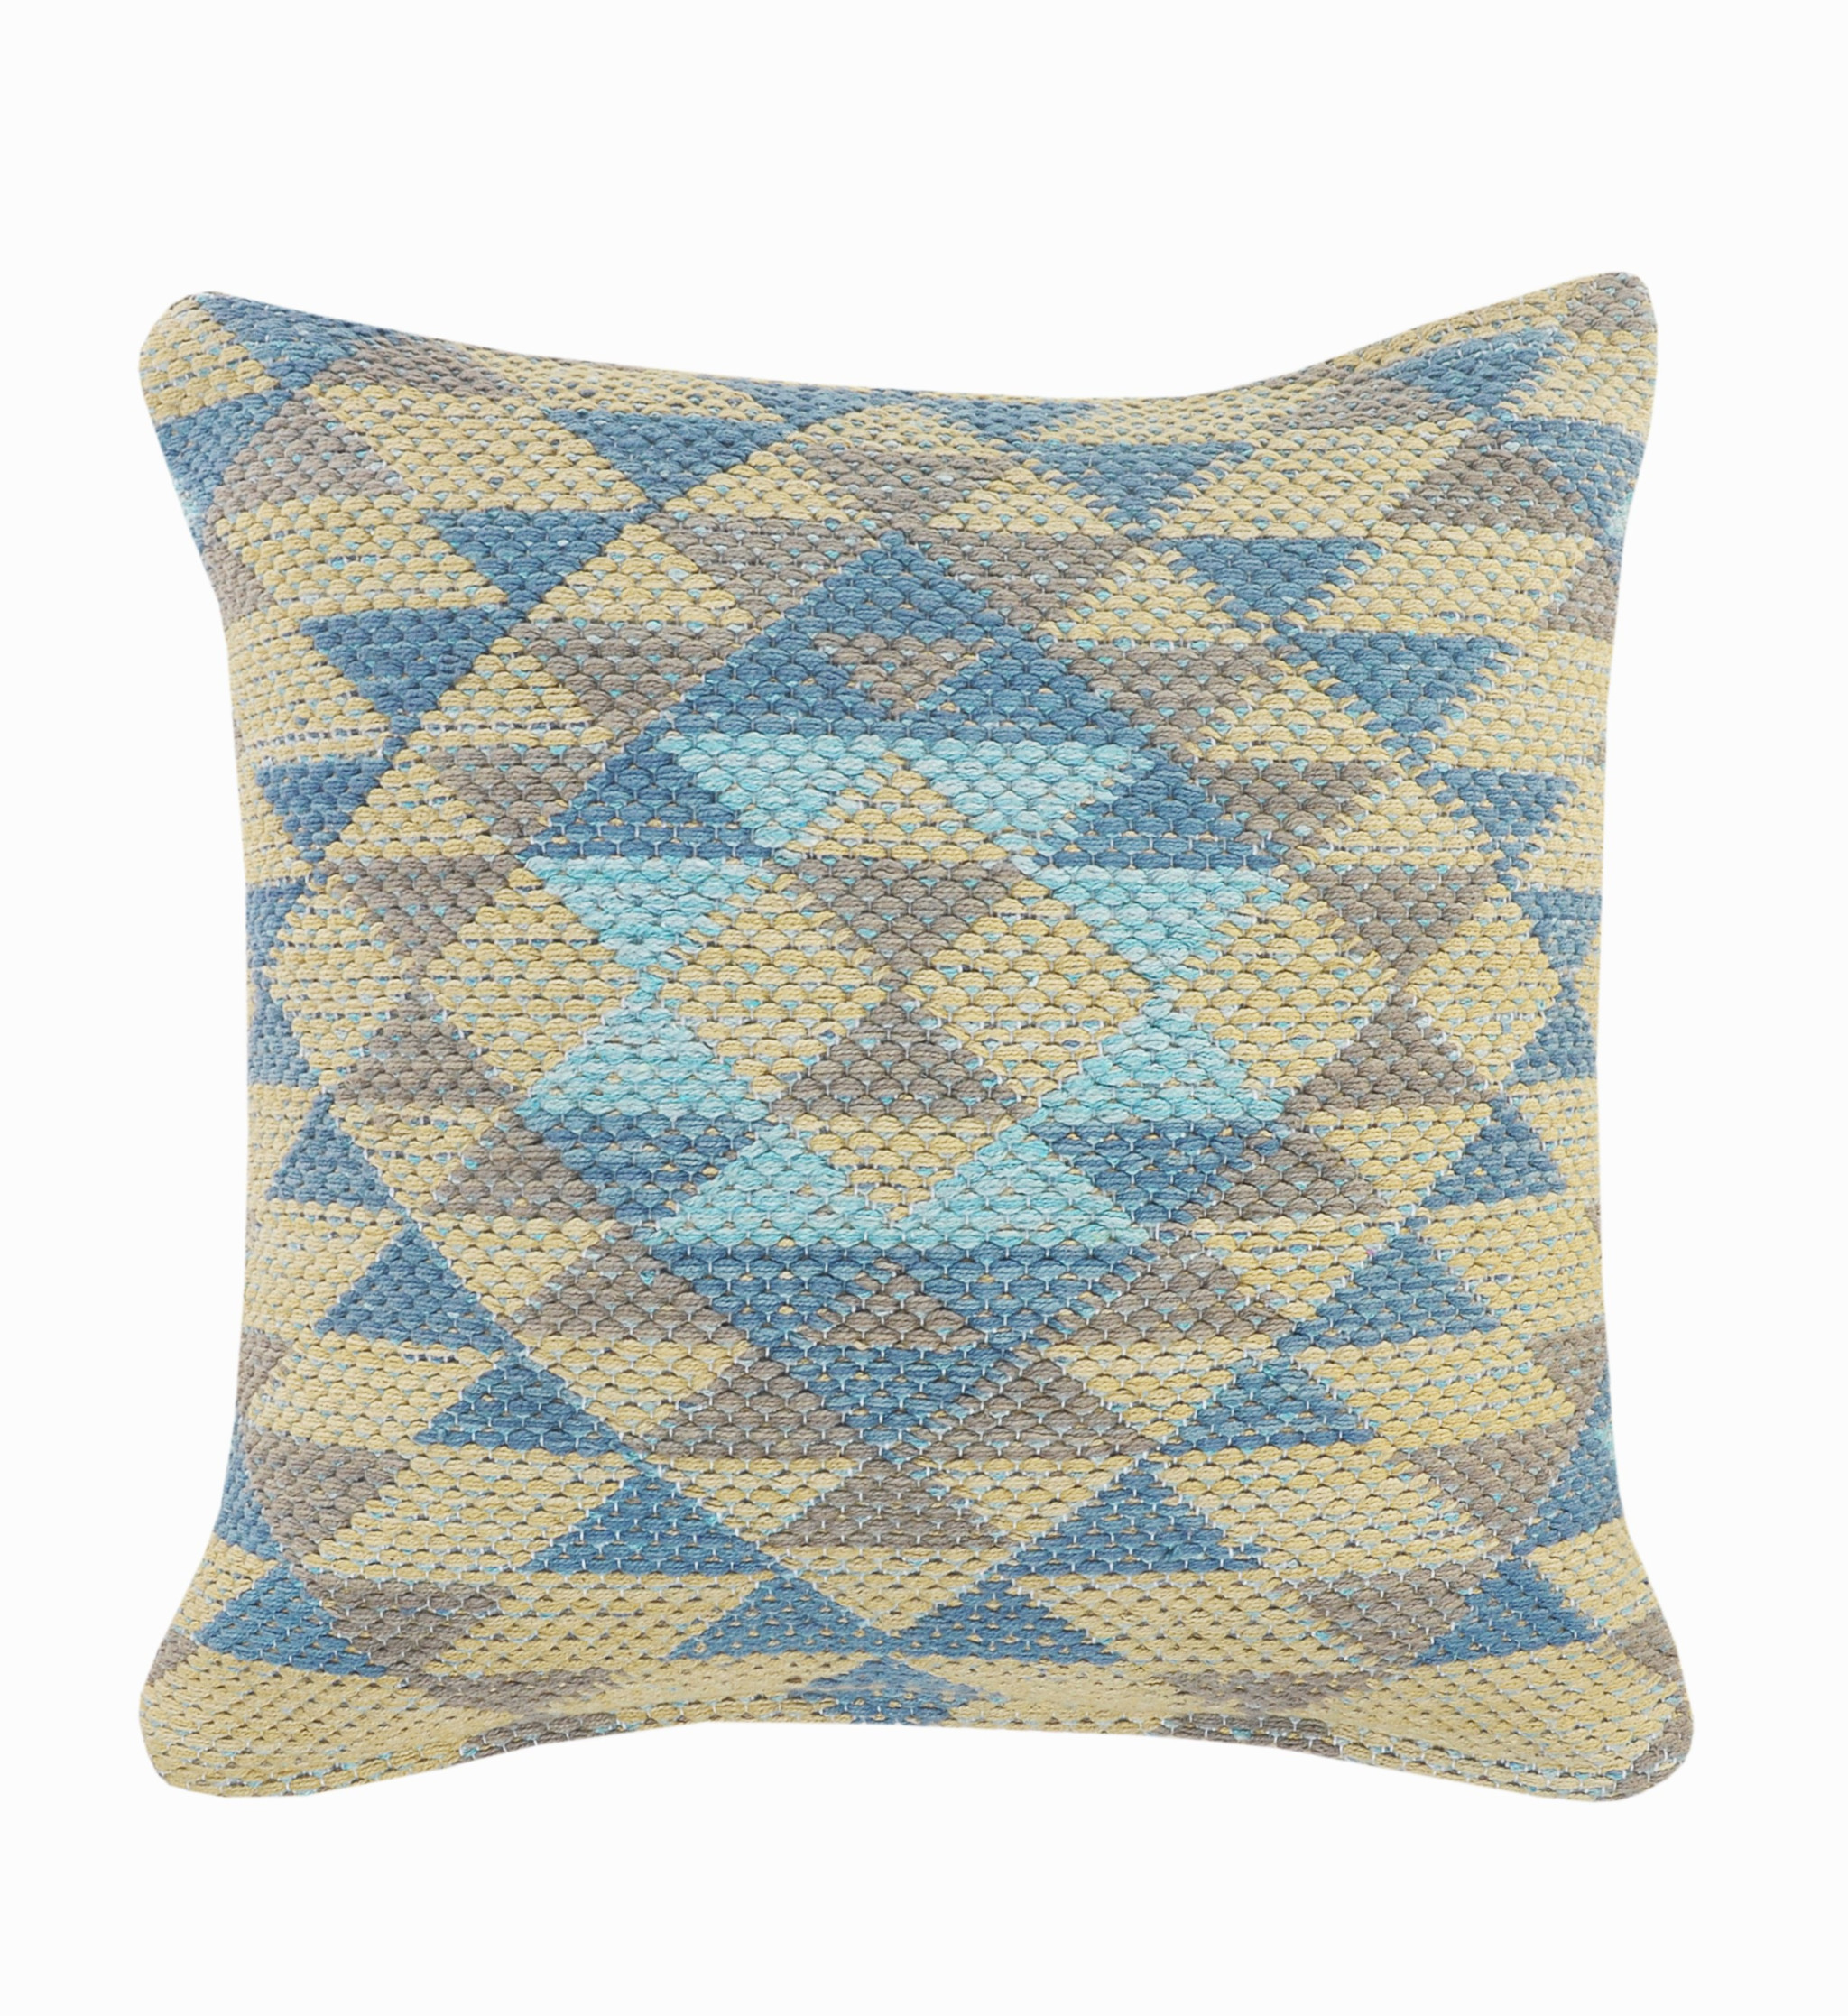 18" X 18" Blue Gray And Beige 100% Cotton Geometric Zippered Pillow-516768-1